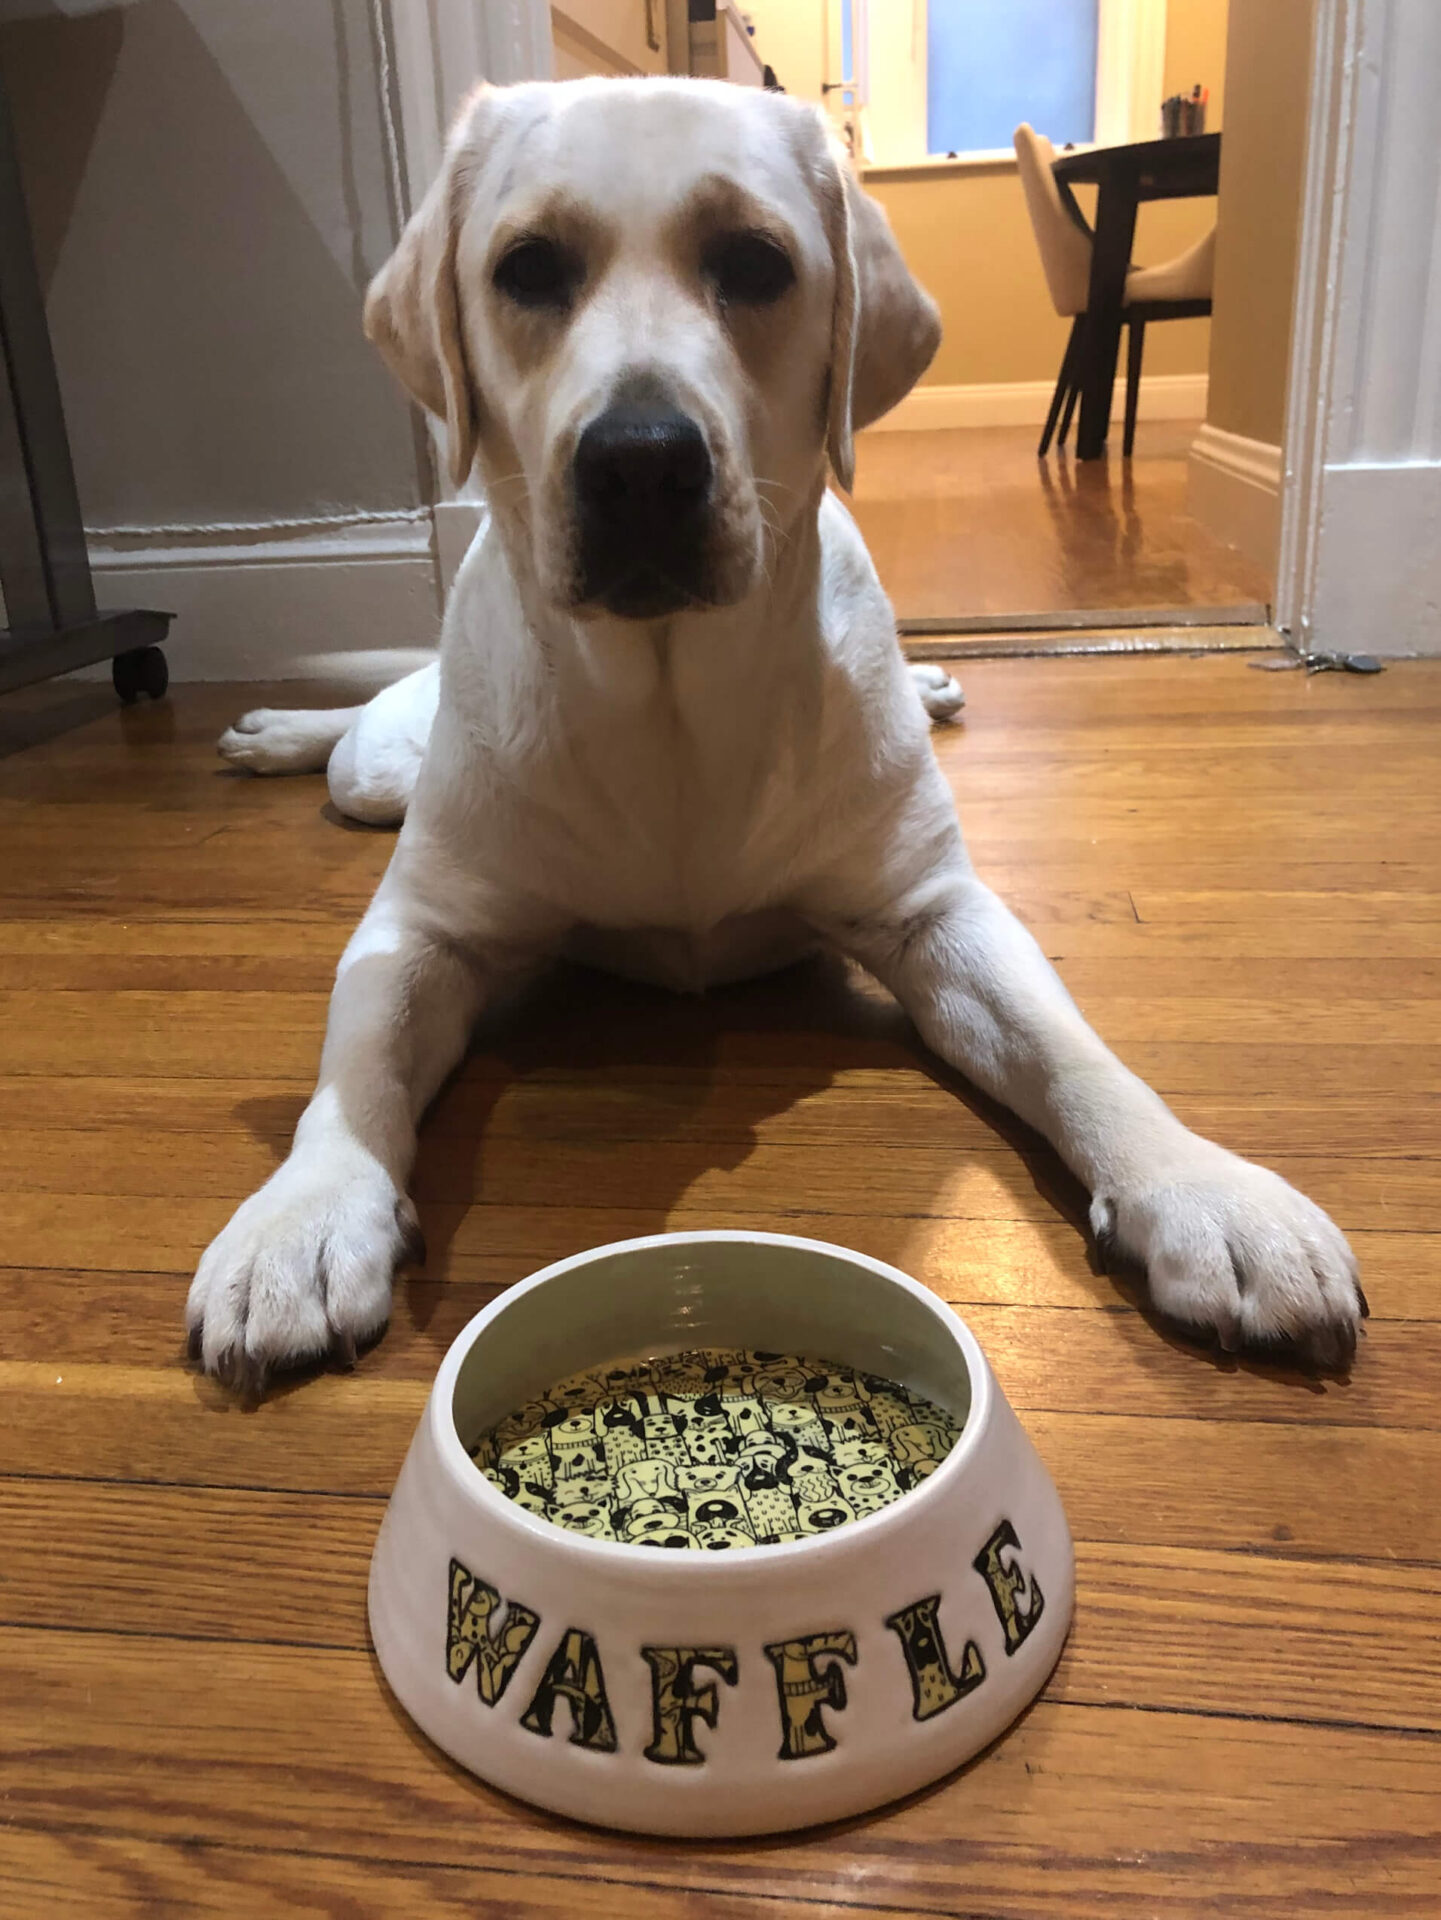 A white color dog sitting on the floor with its food bowl